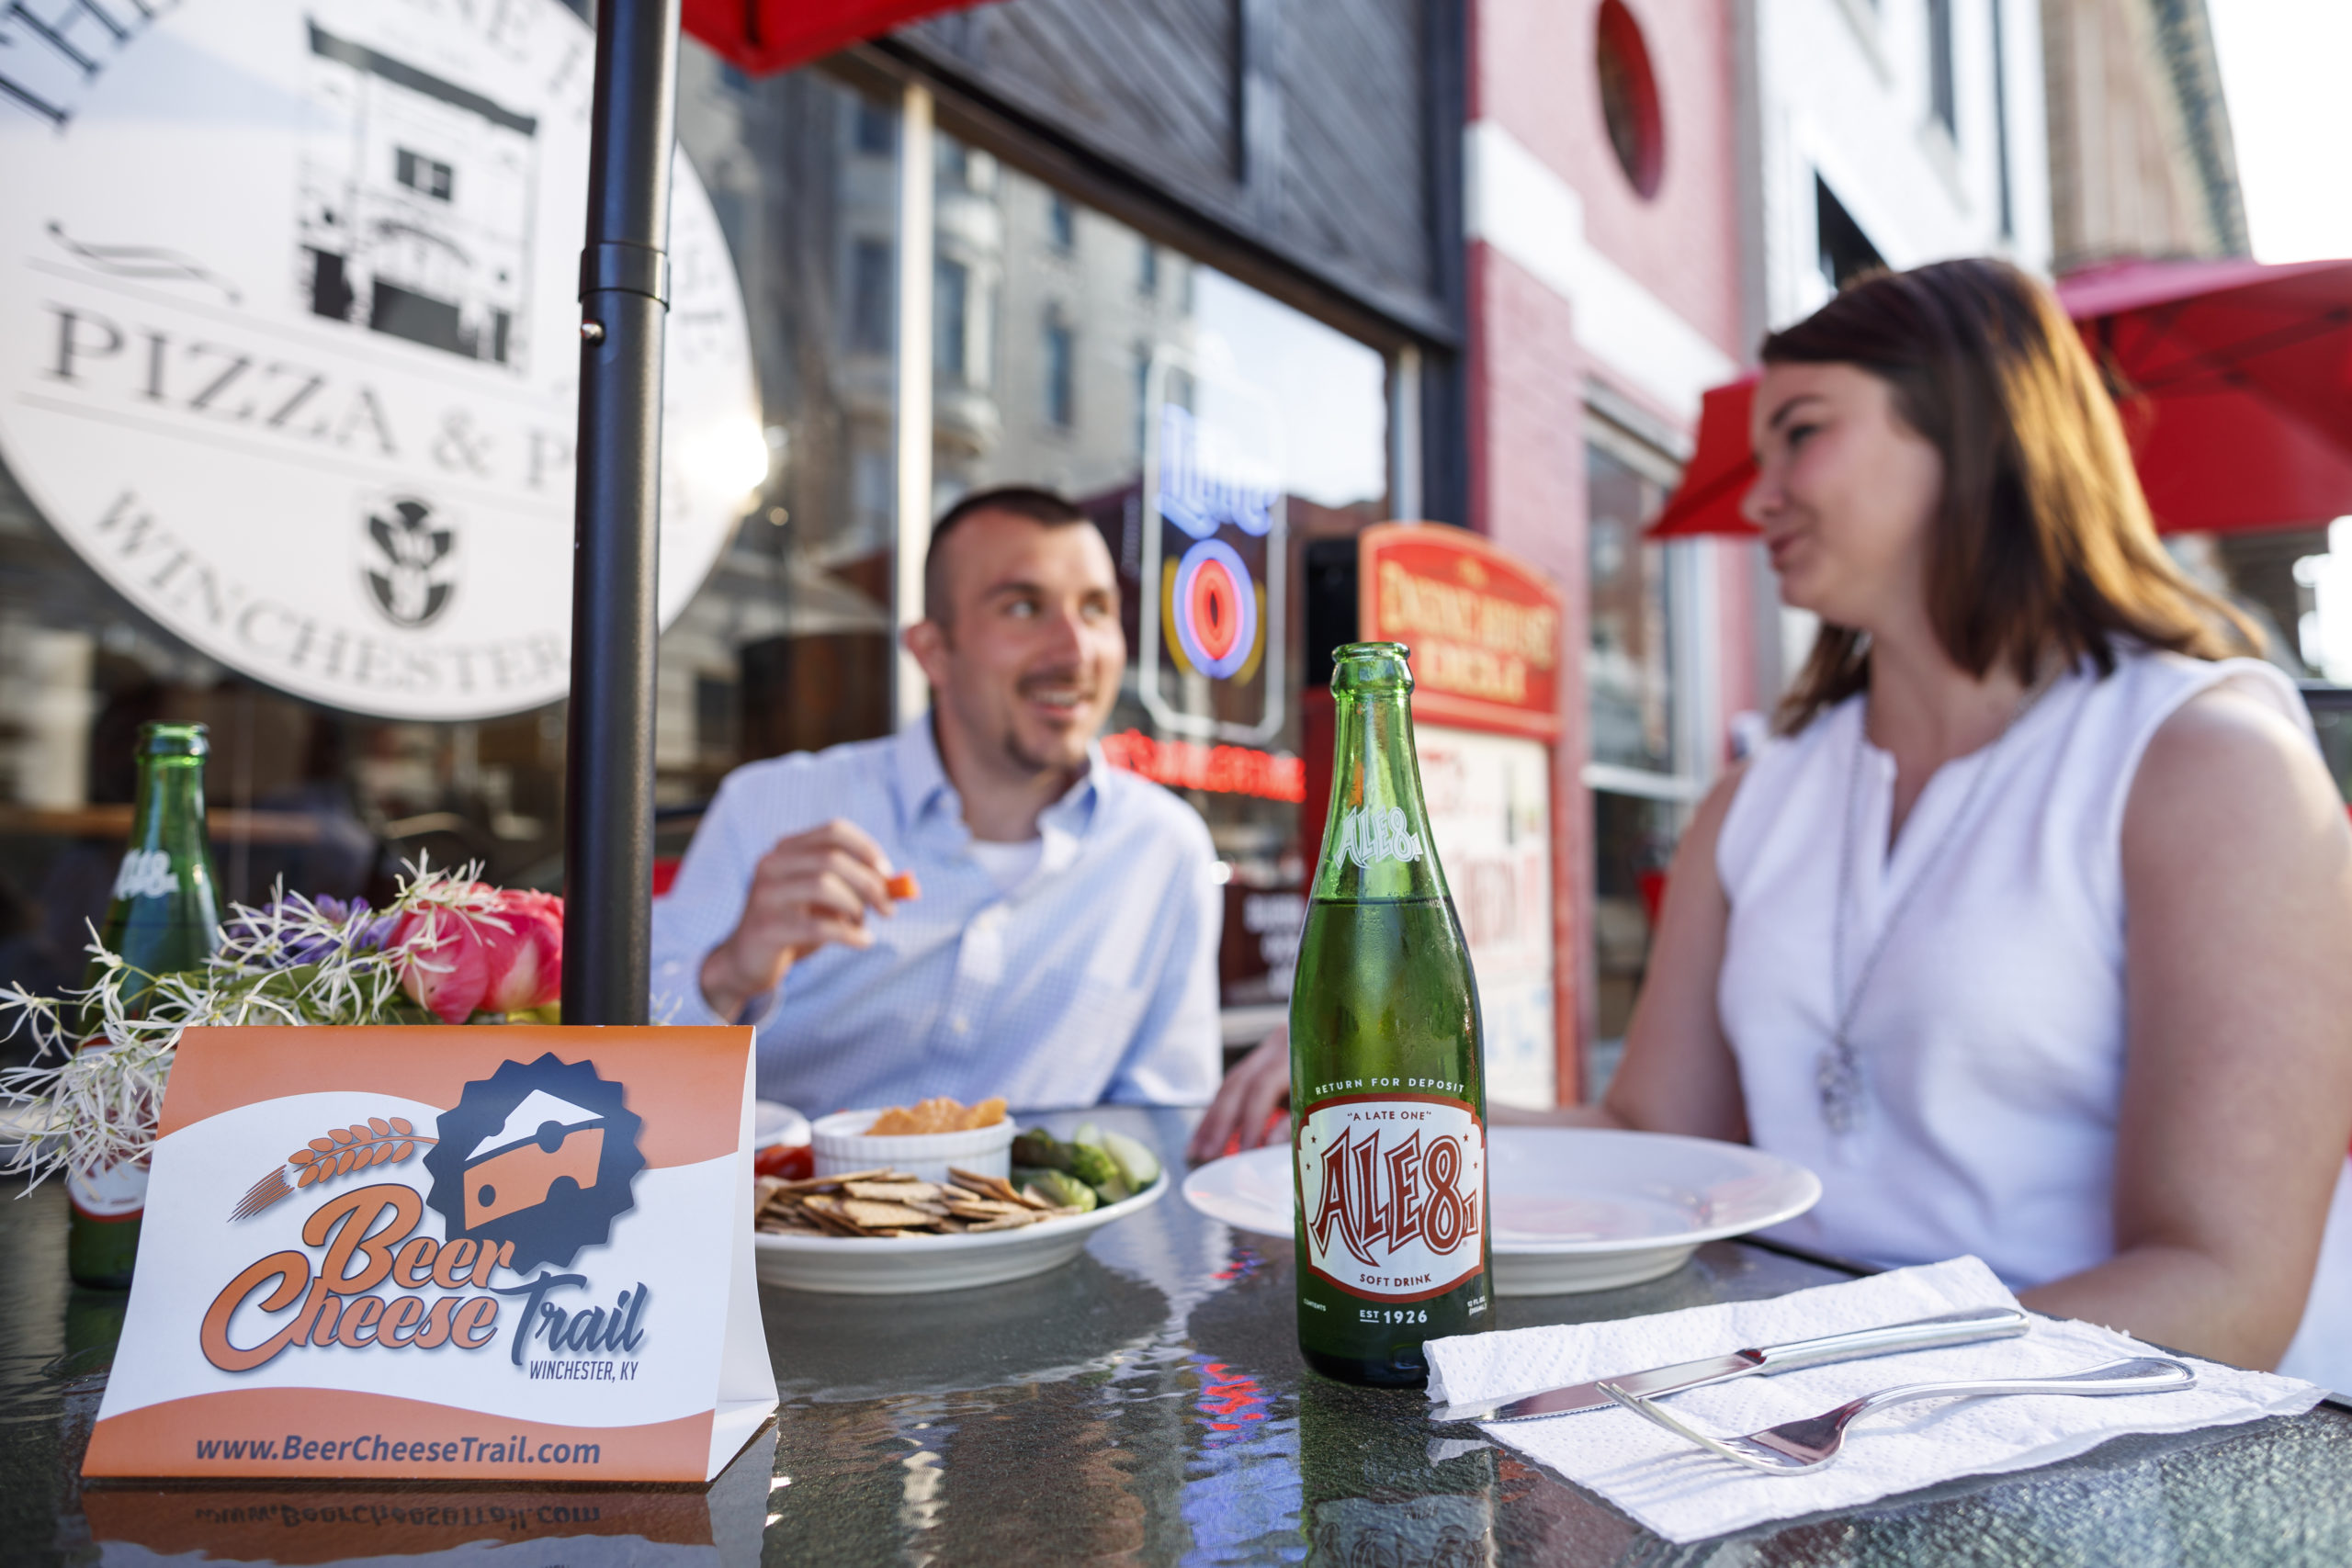 couple enjoying beer cheese and Ale 8 One